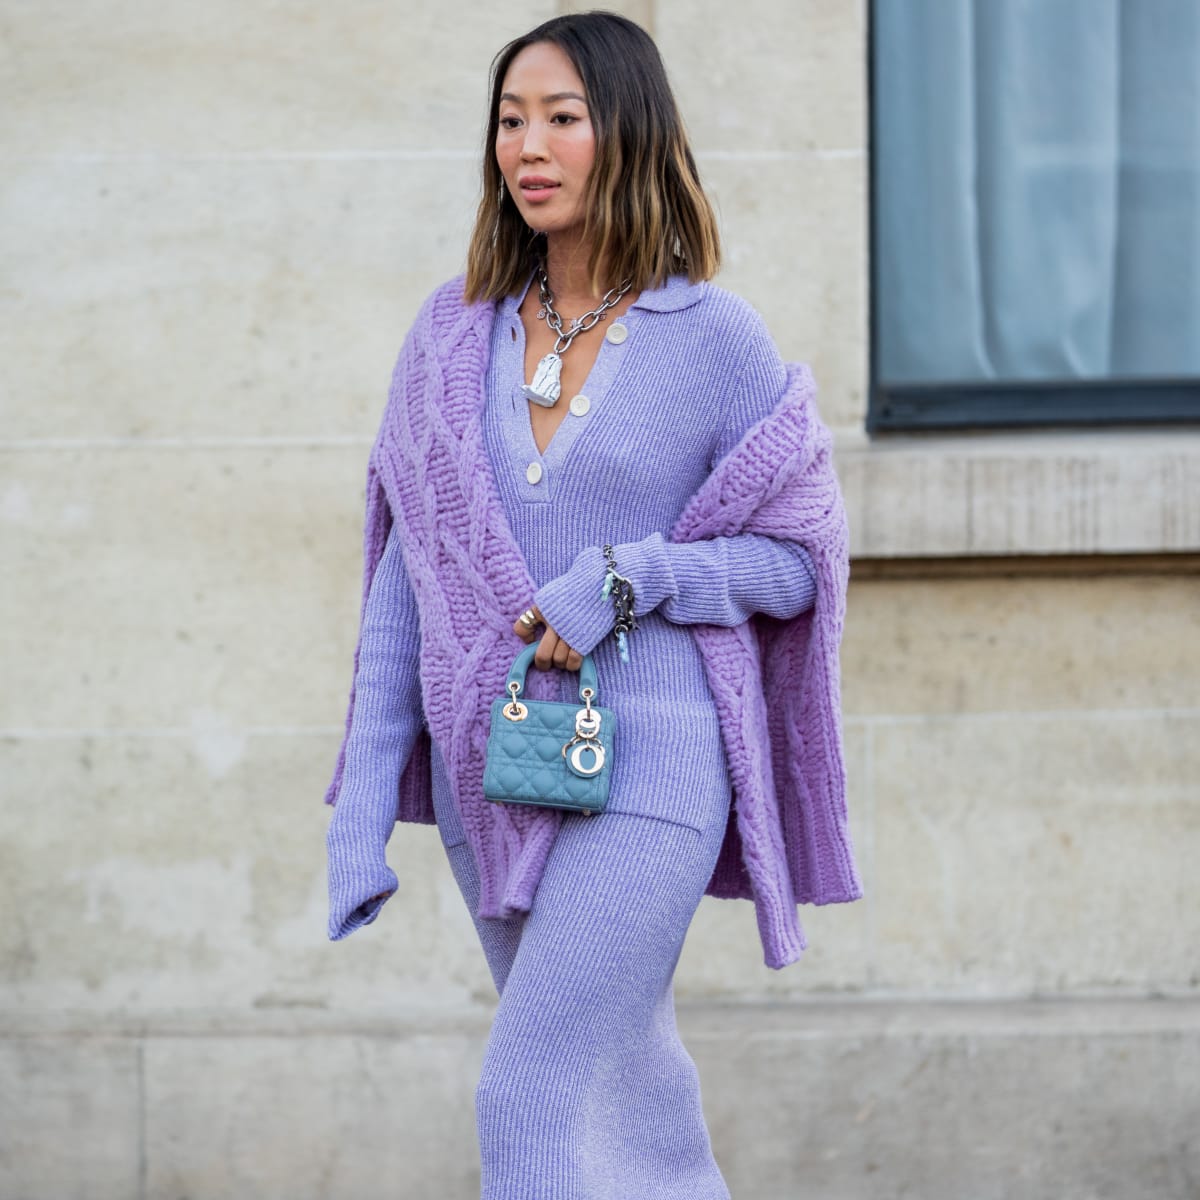 Lilac is One Here\'s Spring We\'re How Trends 2024\'s - — of Color Biggest It Wearing Now Fashionista